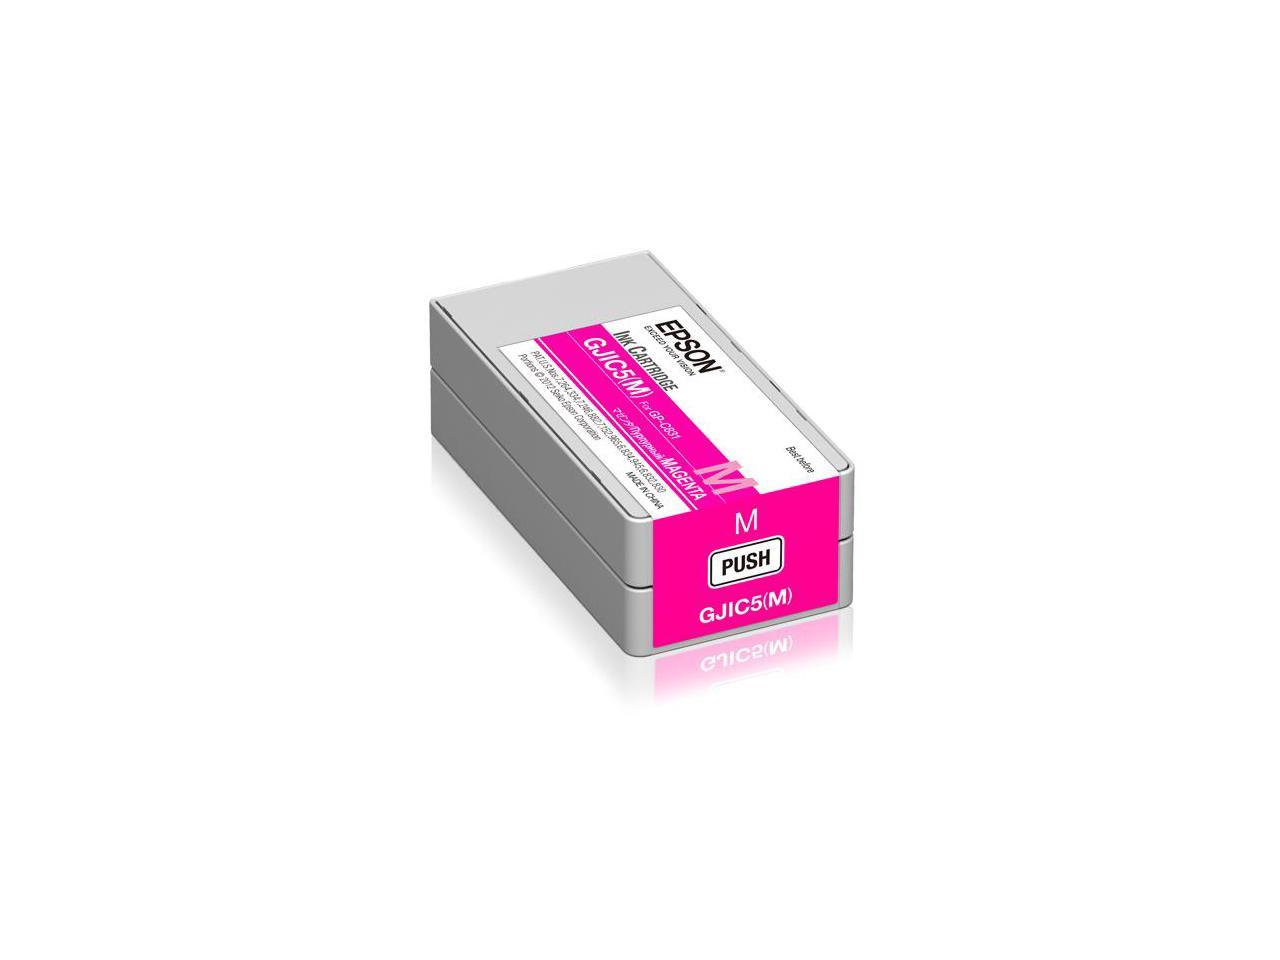 EPSON C13S020565 CONSUMABLES MAGENTA CJIC5(M) INKJET CARTRIDGE RESTRICTED TO COLORWORKS PARTNERS ONLY COLORWORKS C831 COMPATIBLE PRICED PER CARTRIDGE